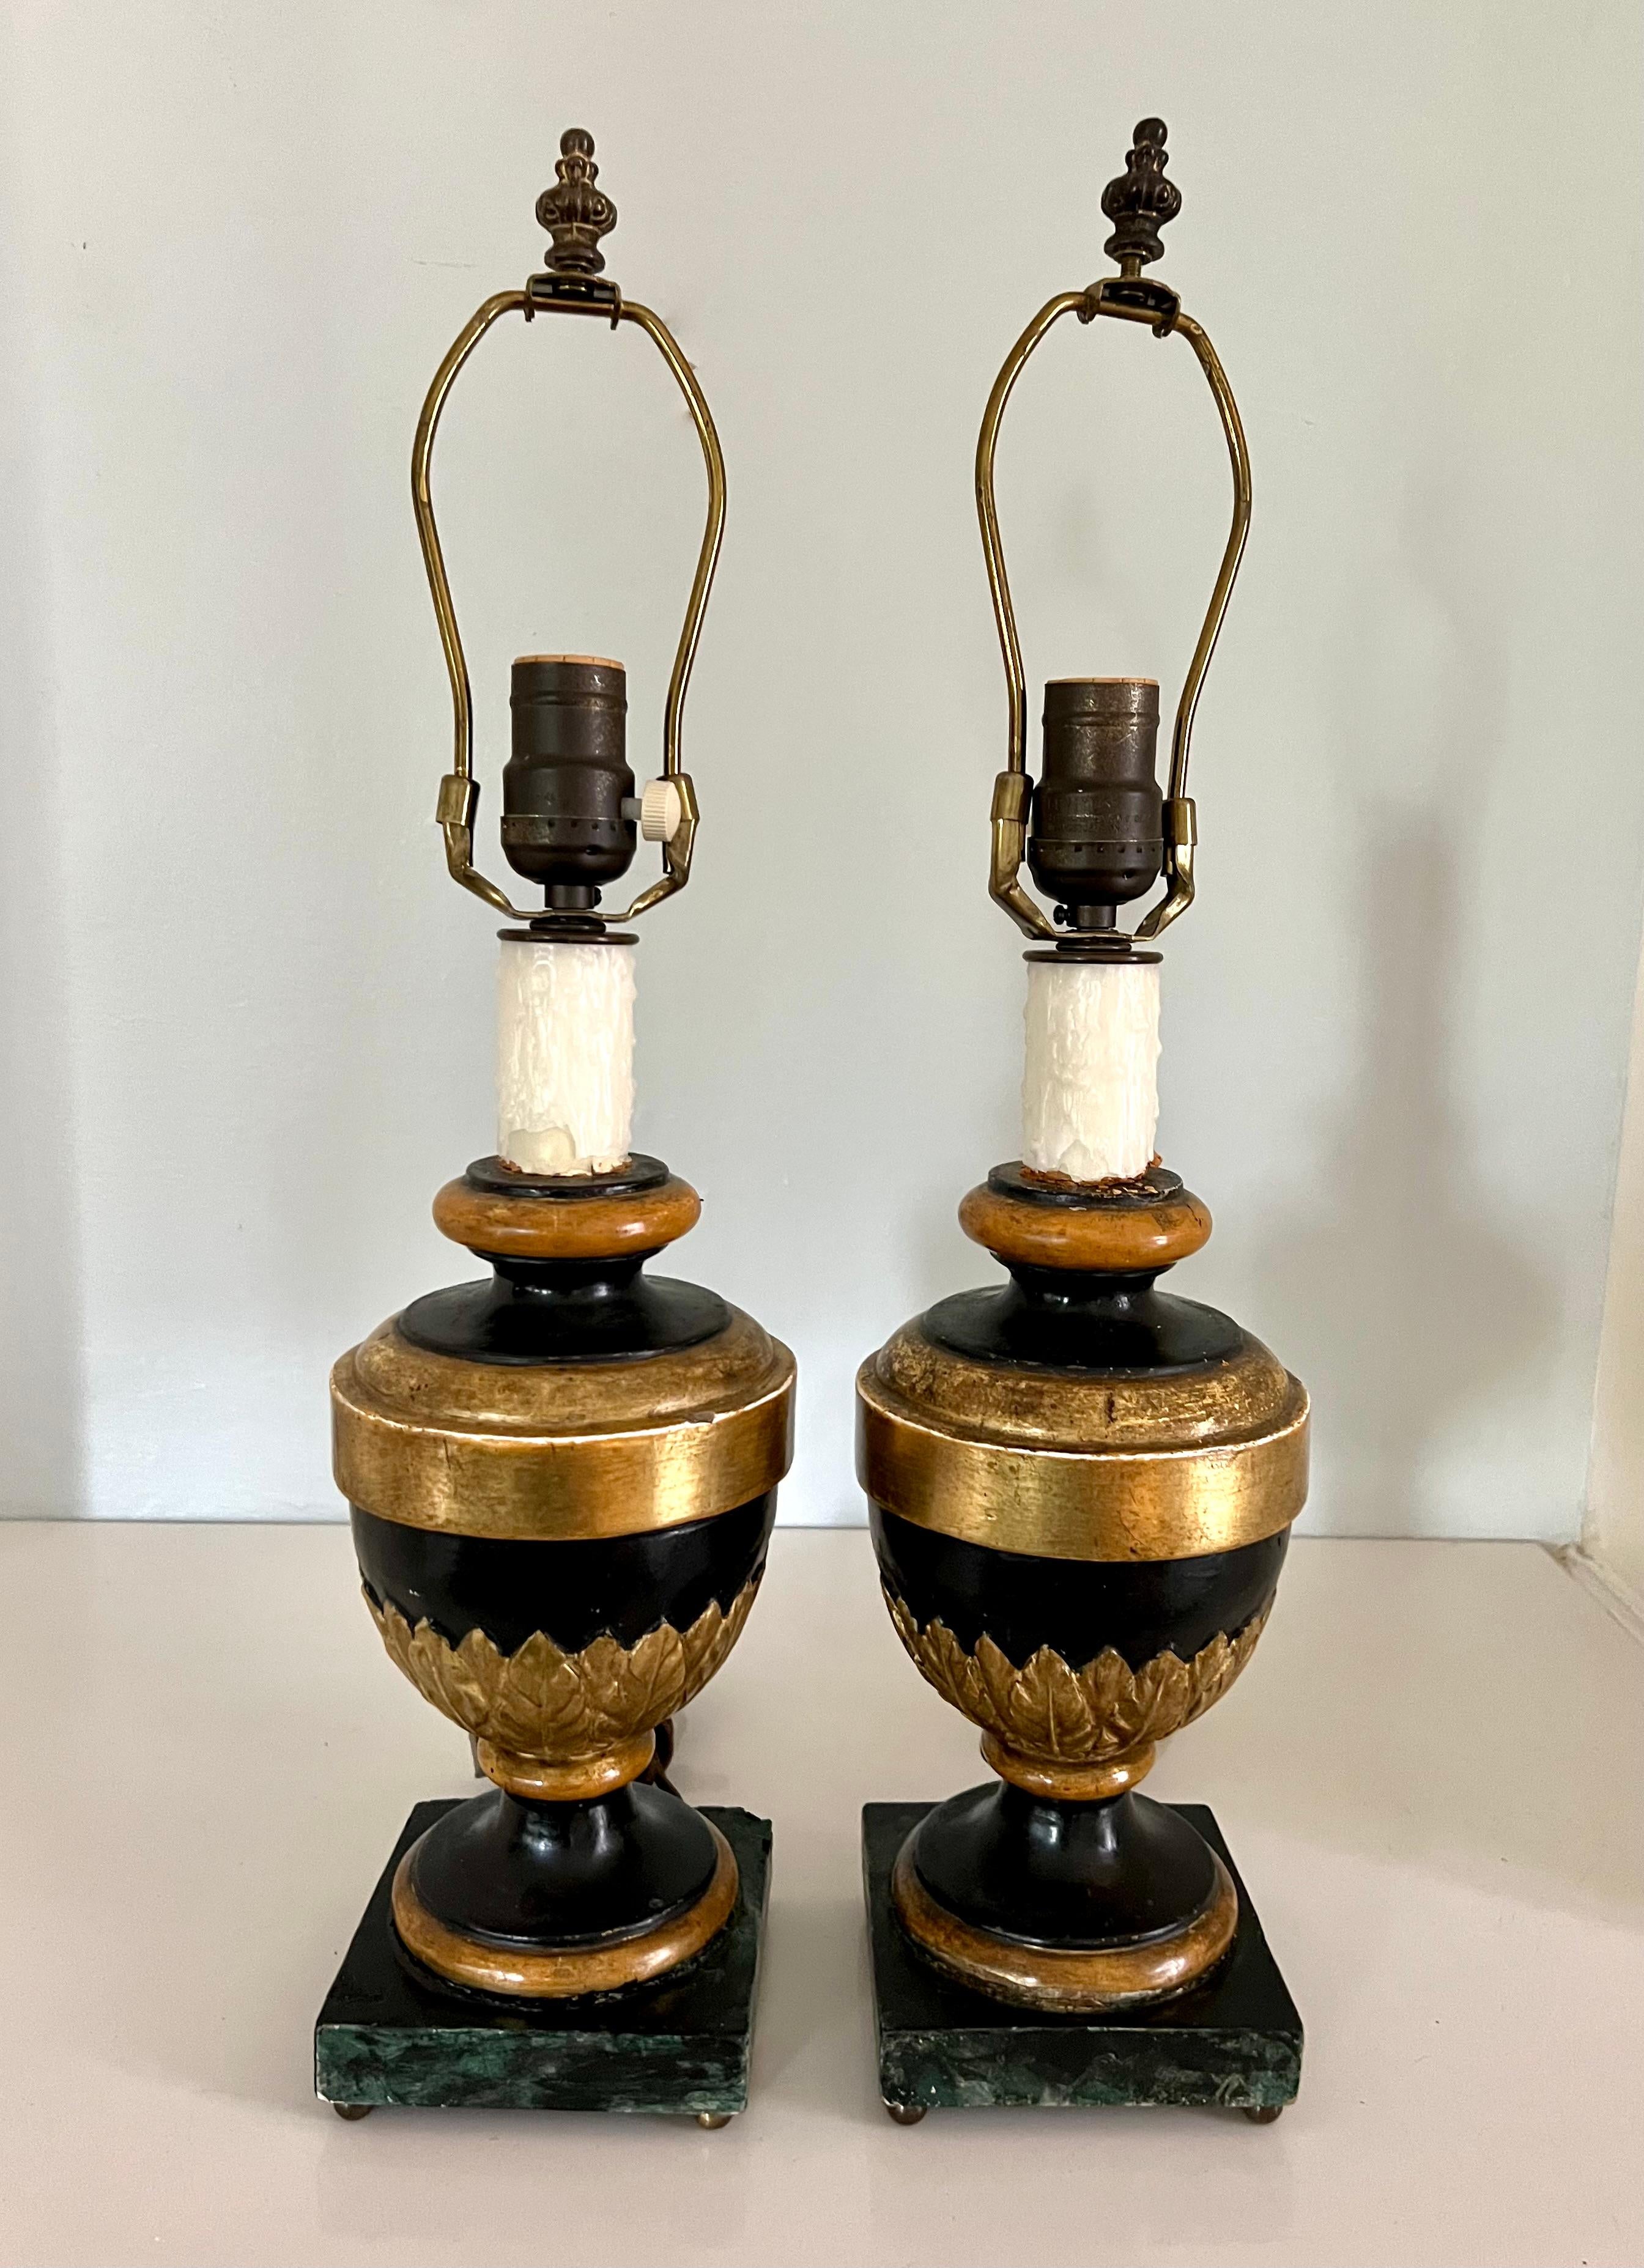 The pair are definitely fussy and with a bit of a weathered look. With had done centers and faux marble bases, the pair also have a good deal of gilt details, the shades, which are included, are very nice hand-made parchment shades with wonderful